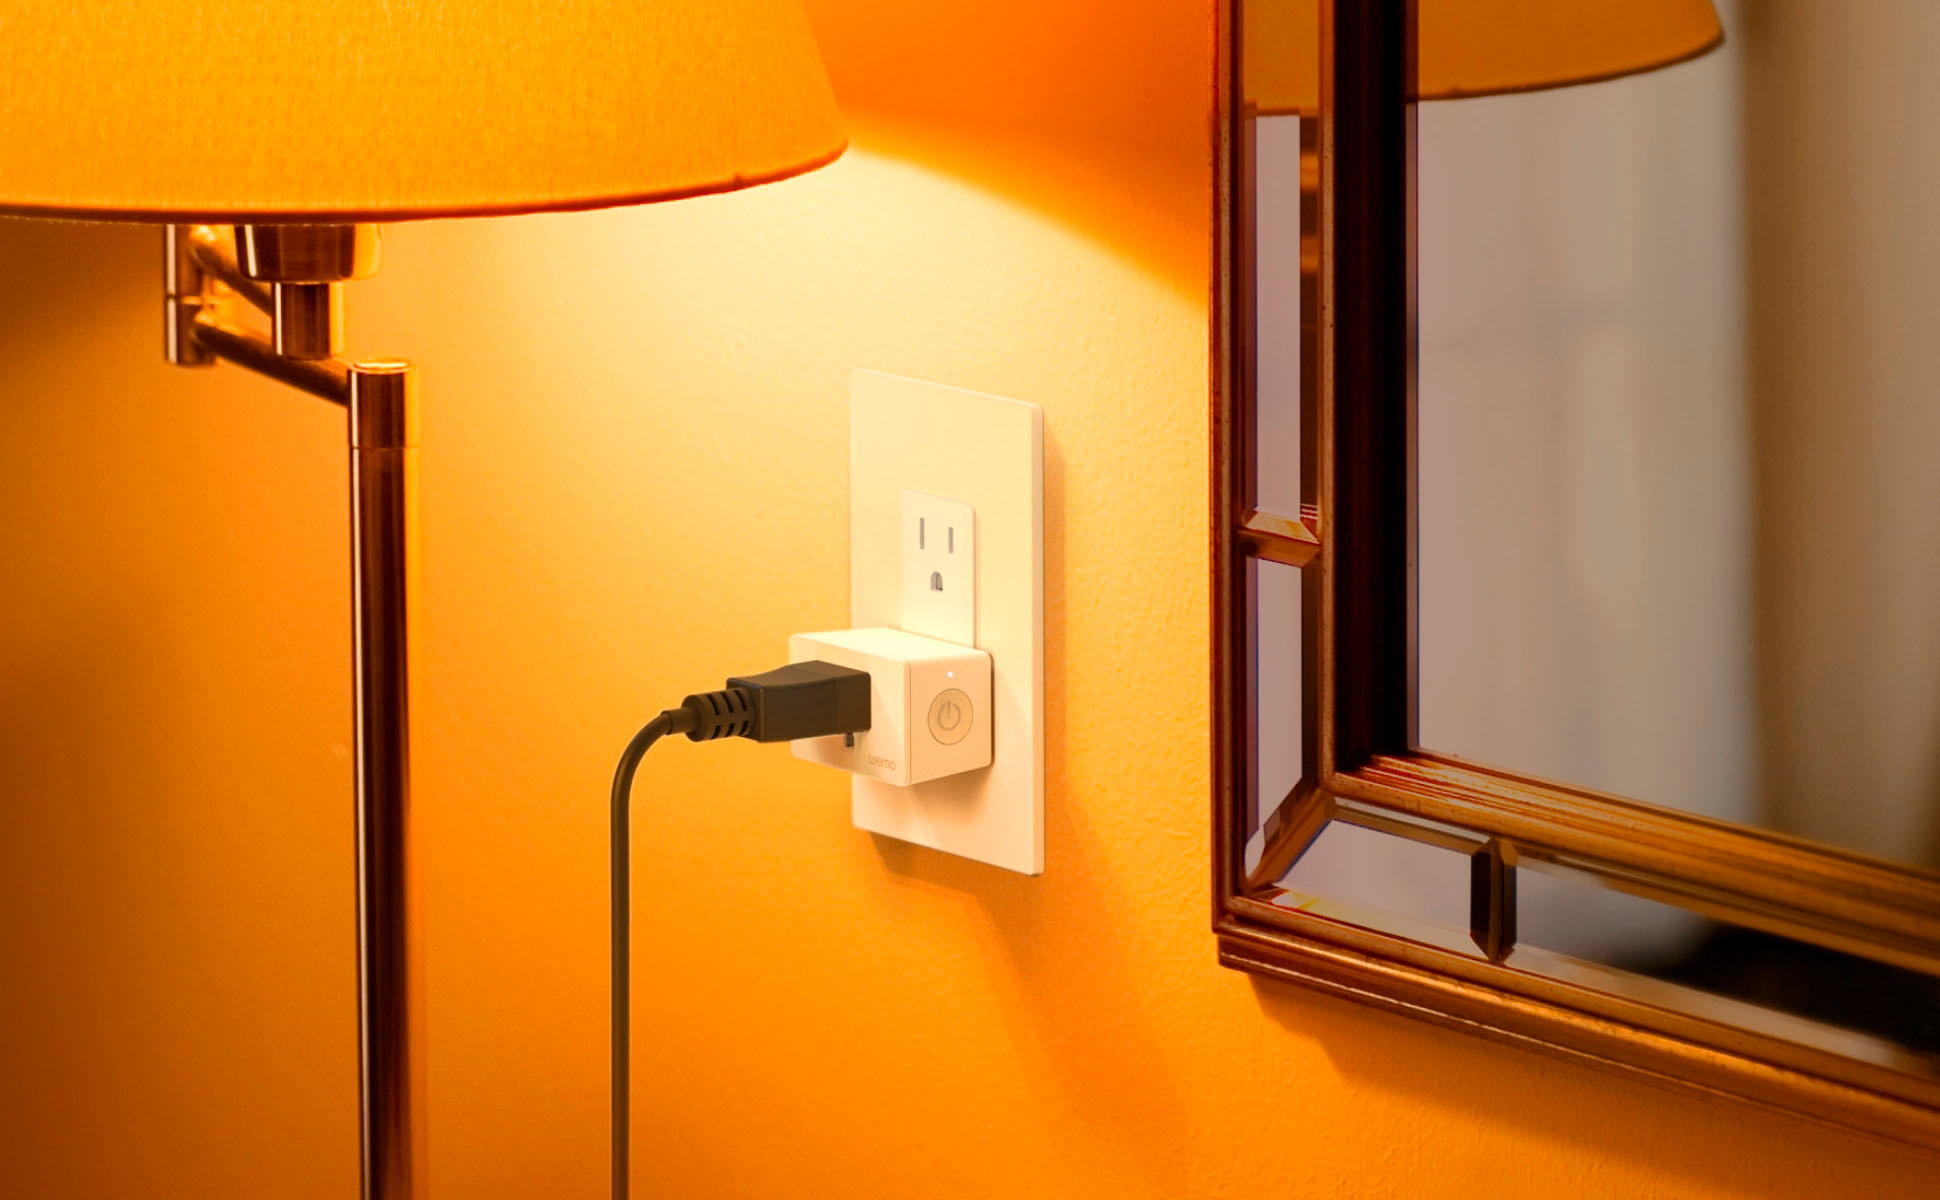 Belkin Wemo Smart Plug with Thread is compatible with Apple